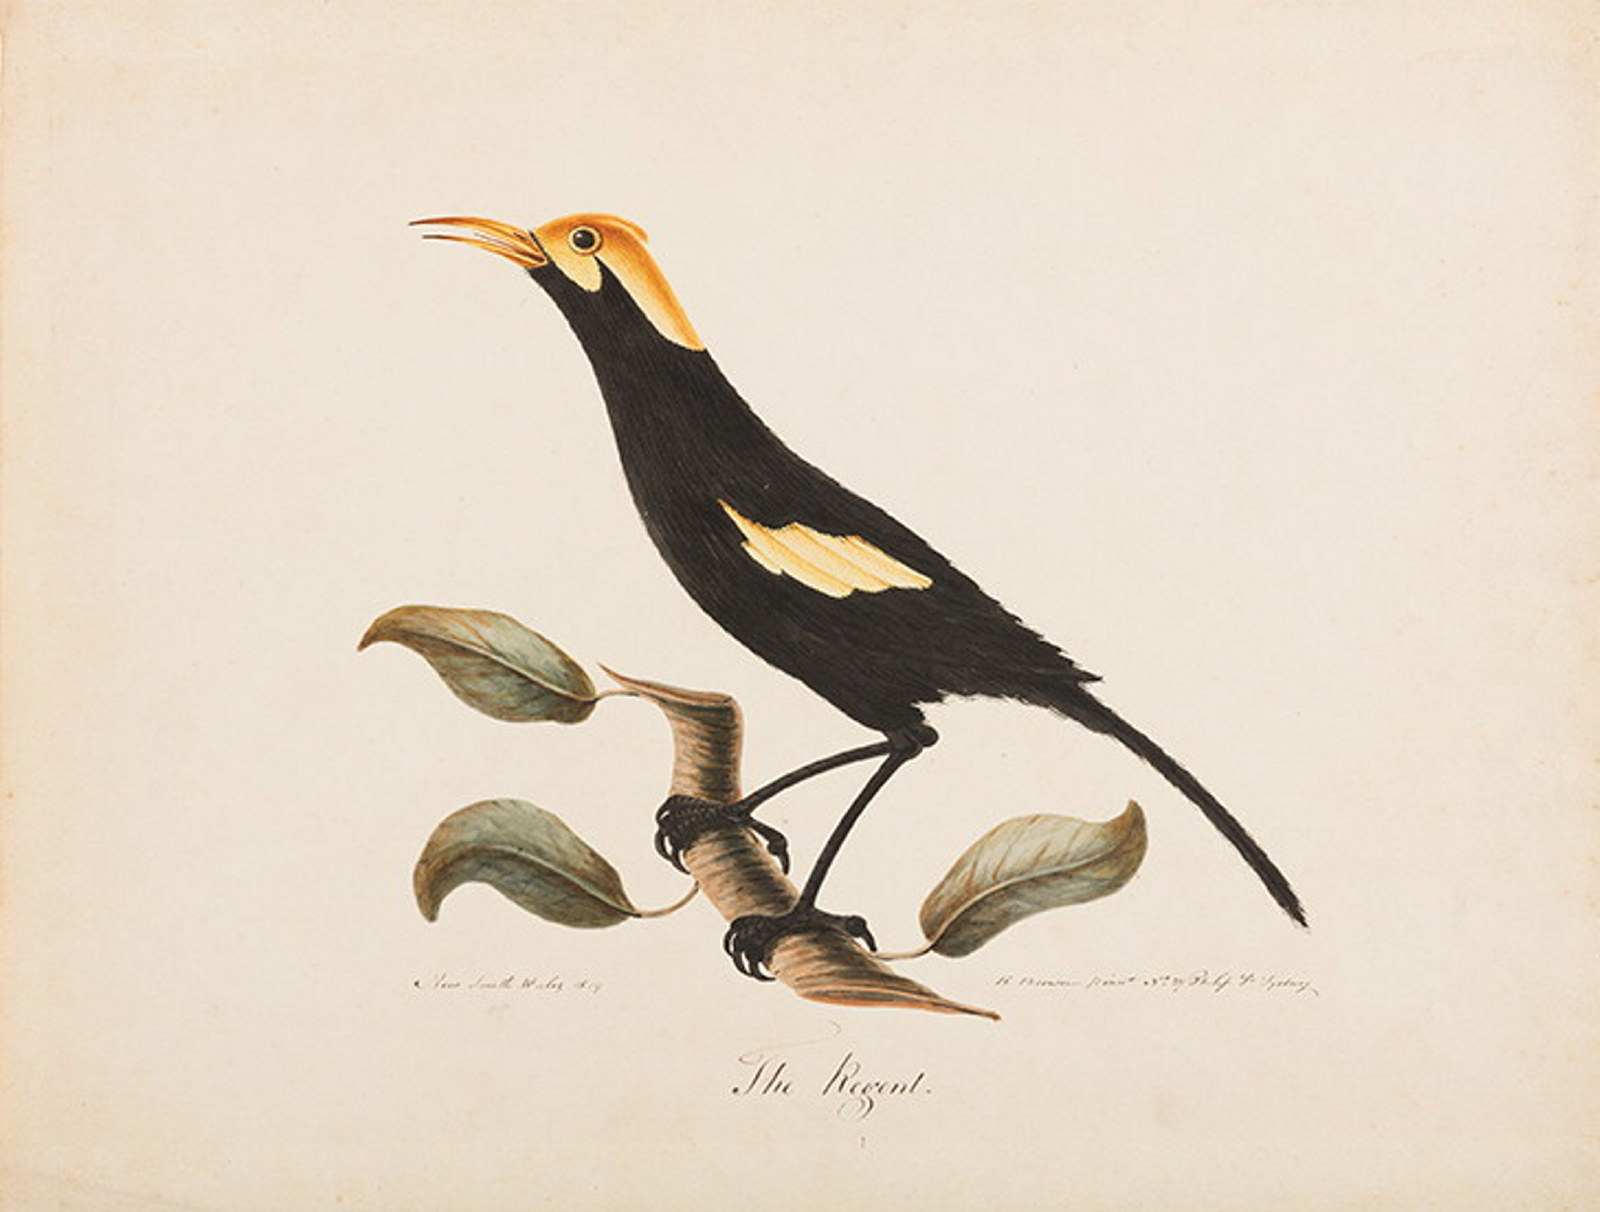 Illustration of black bird with golden crown and shoulders.